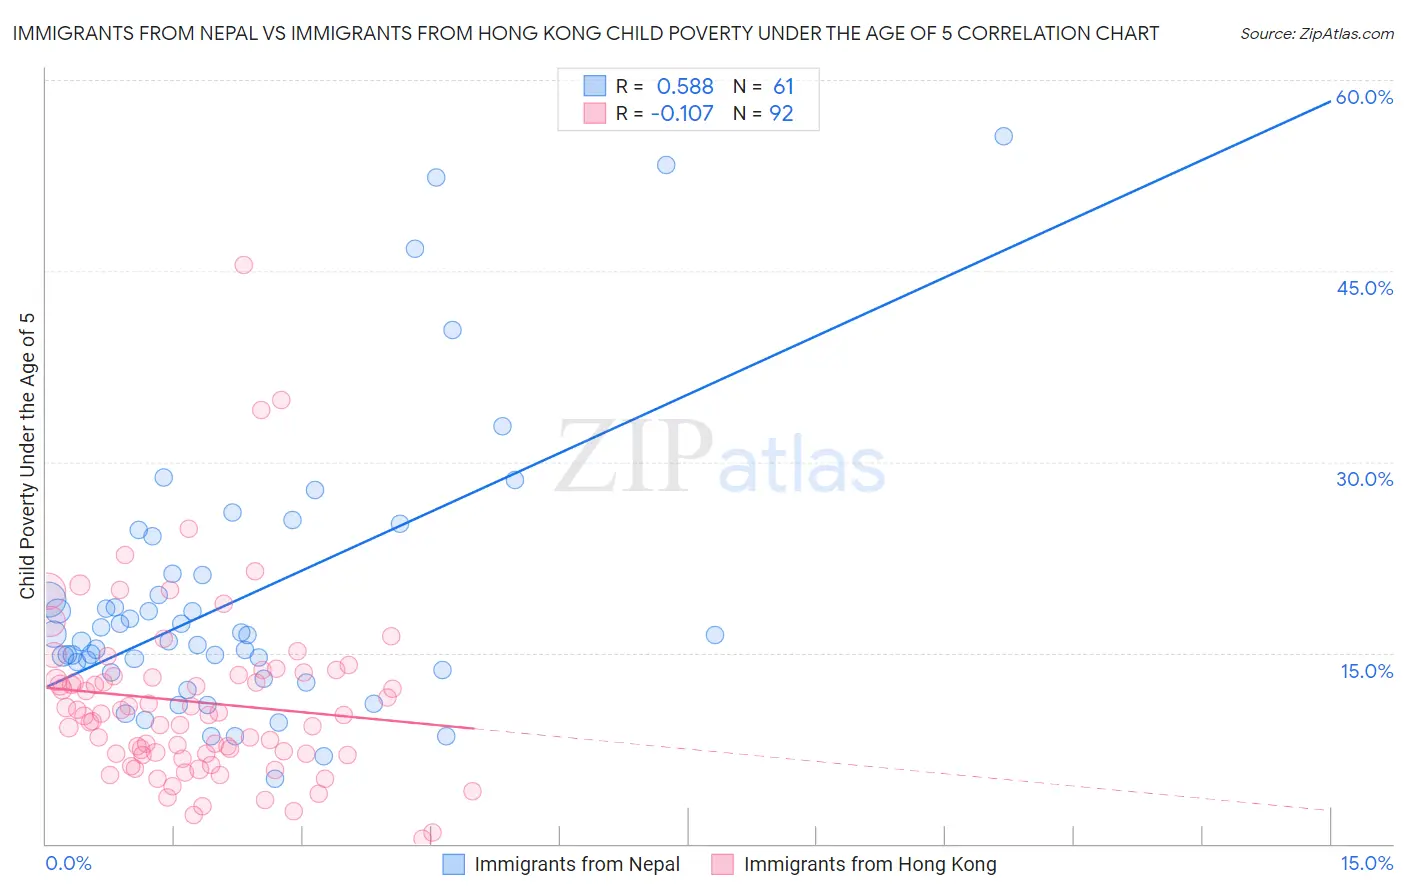 Immigrants from Nepal vs Immigrants from Hong Kong Child Poverty Under the Age of 5